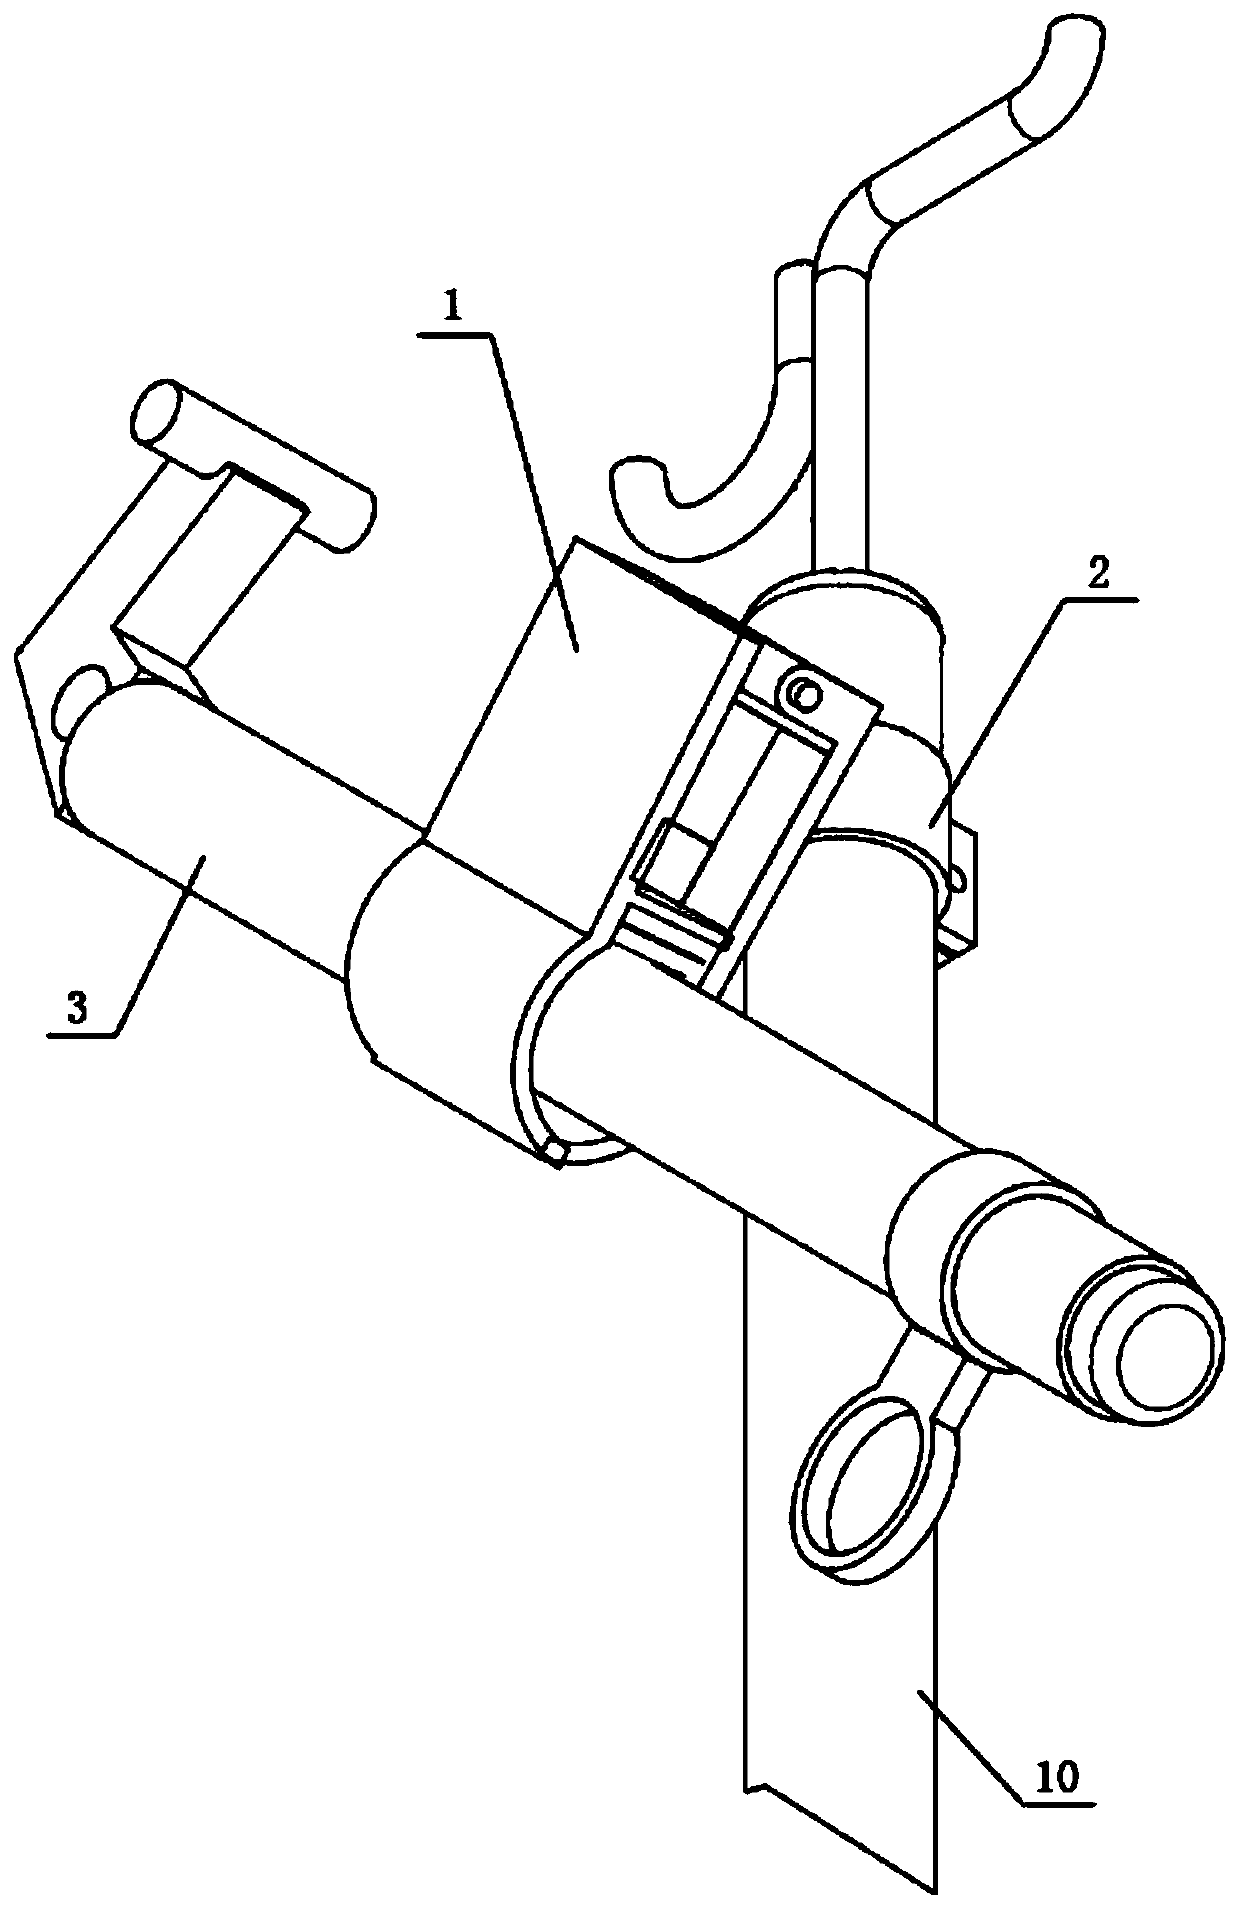 Drop-out fuse installation anti-shaking device